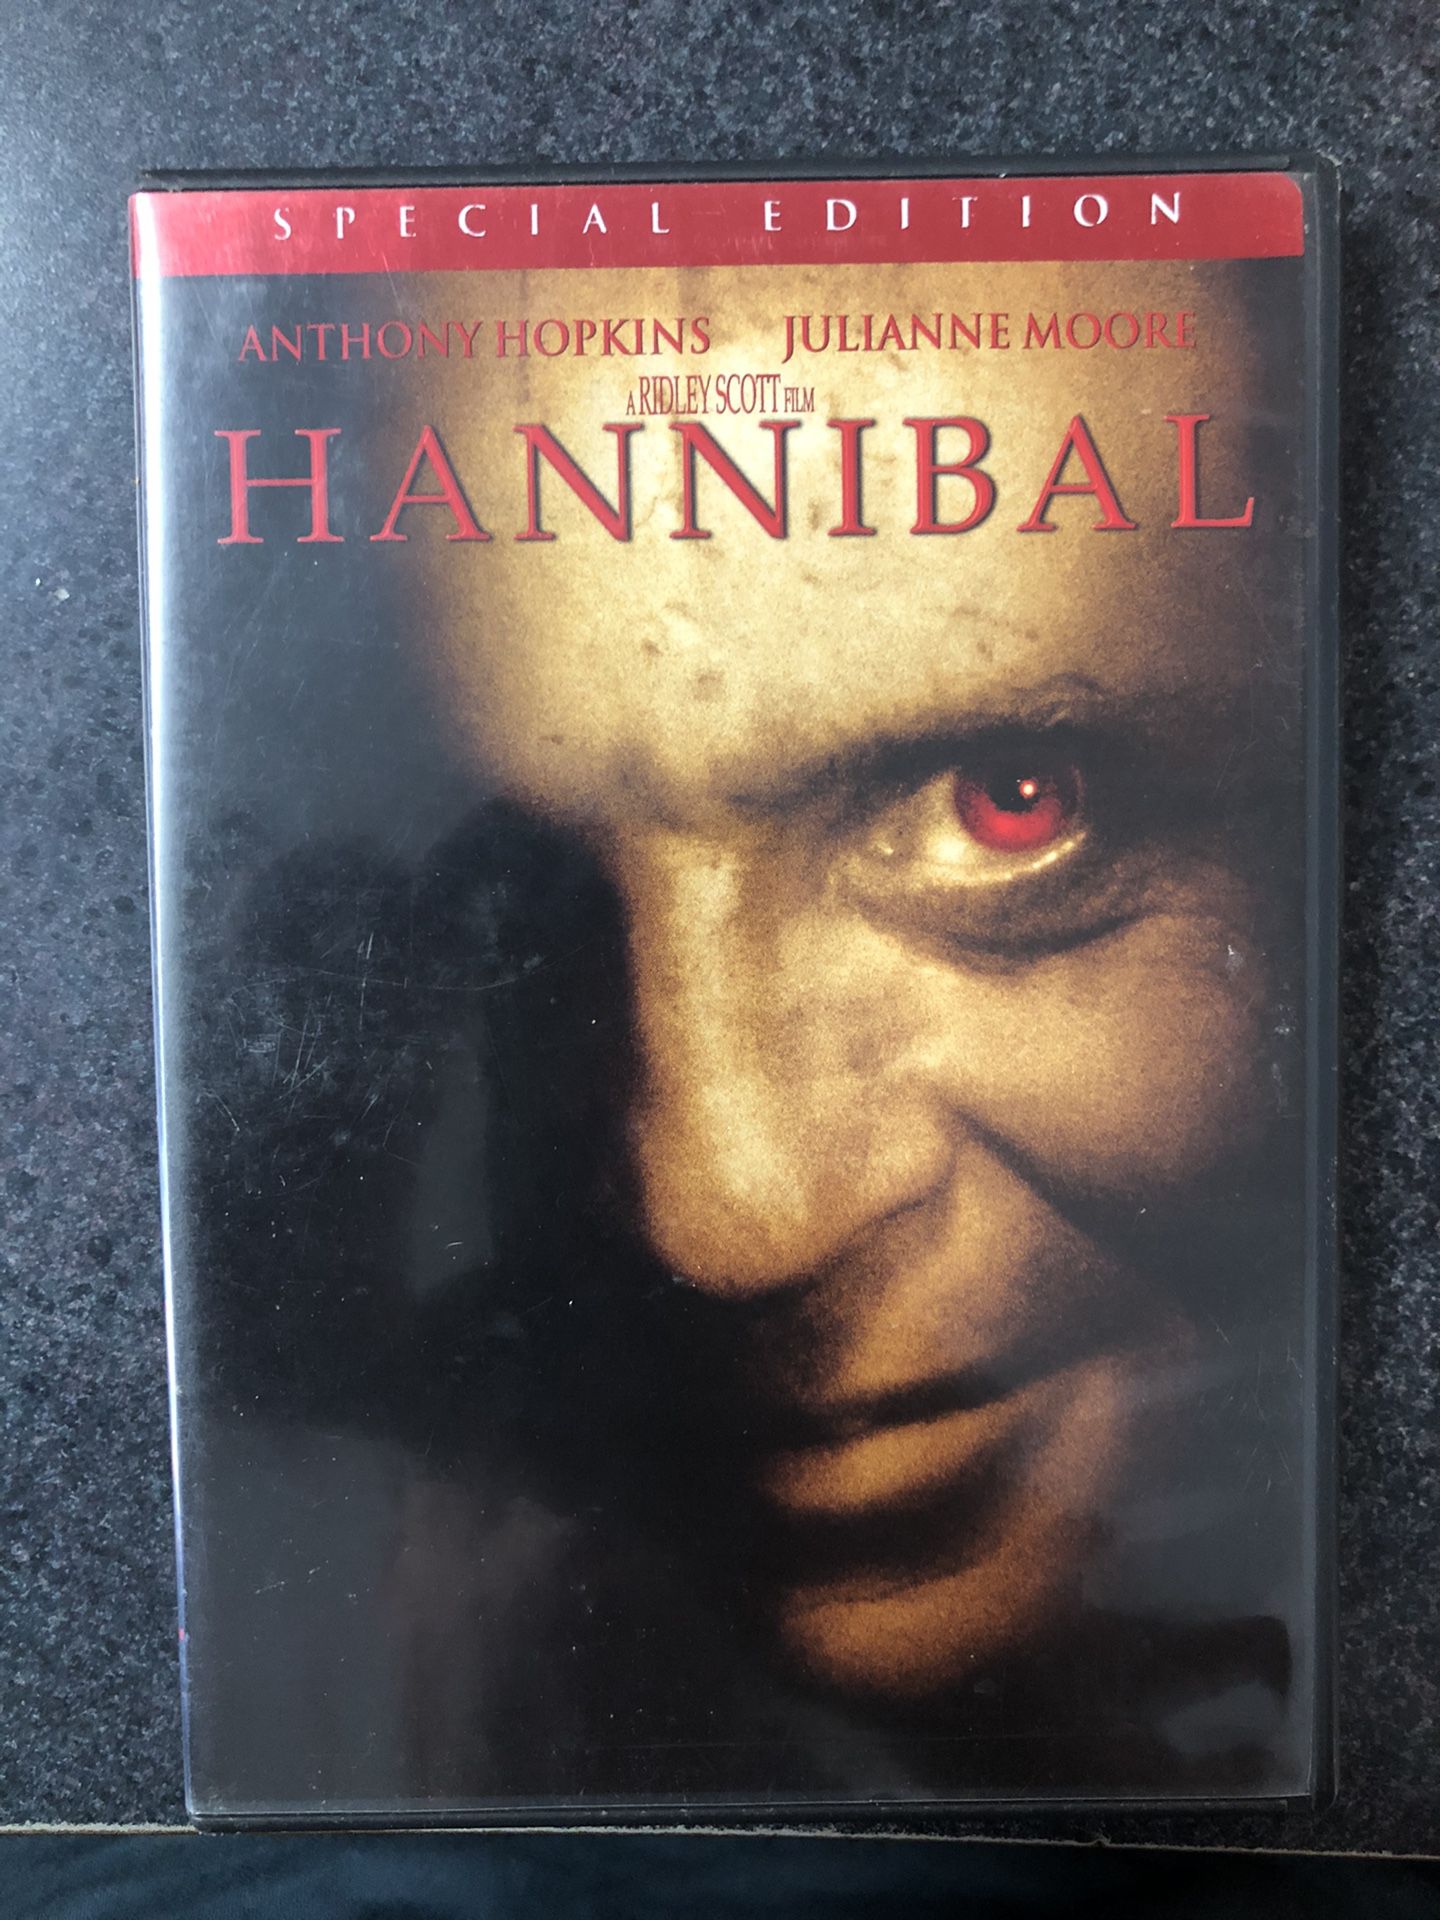 Hannibal Special Edition DVD - Anthony Hopkins